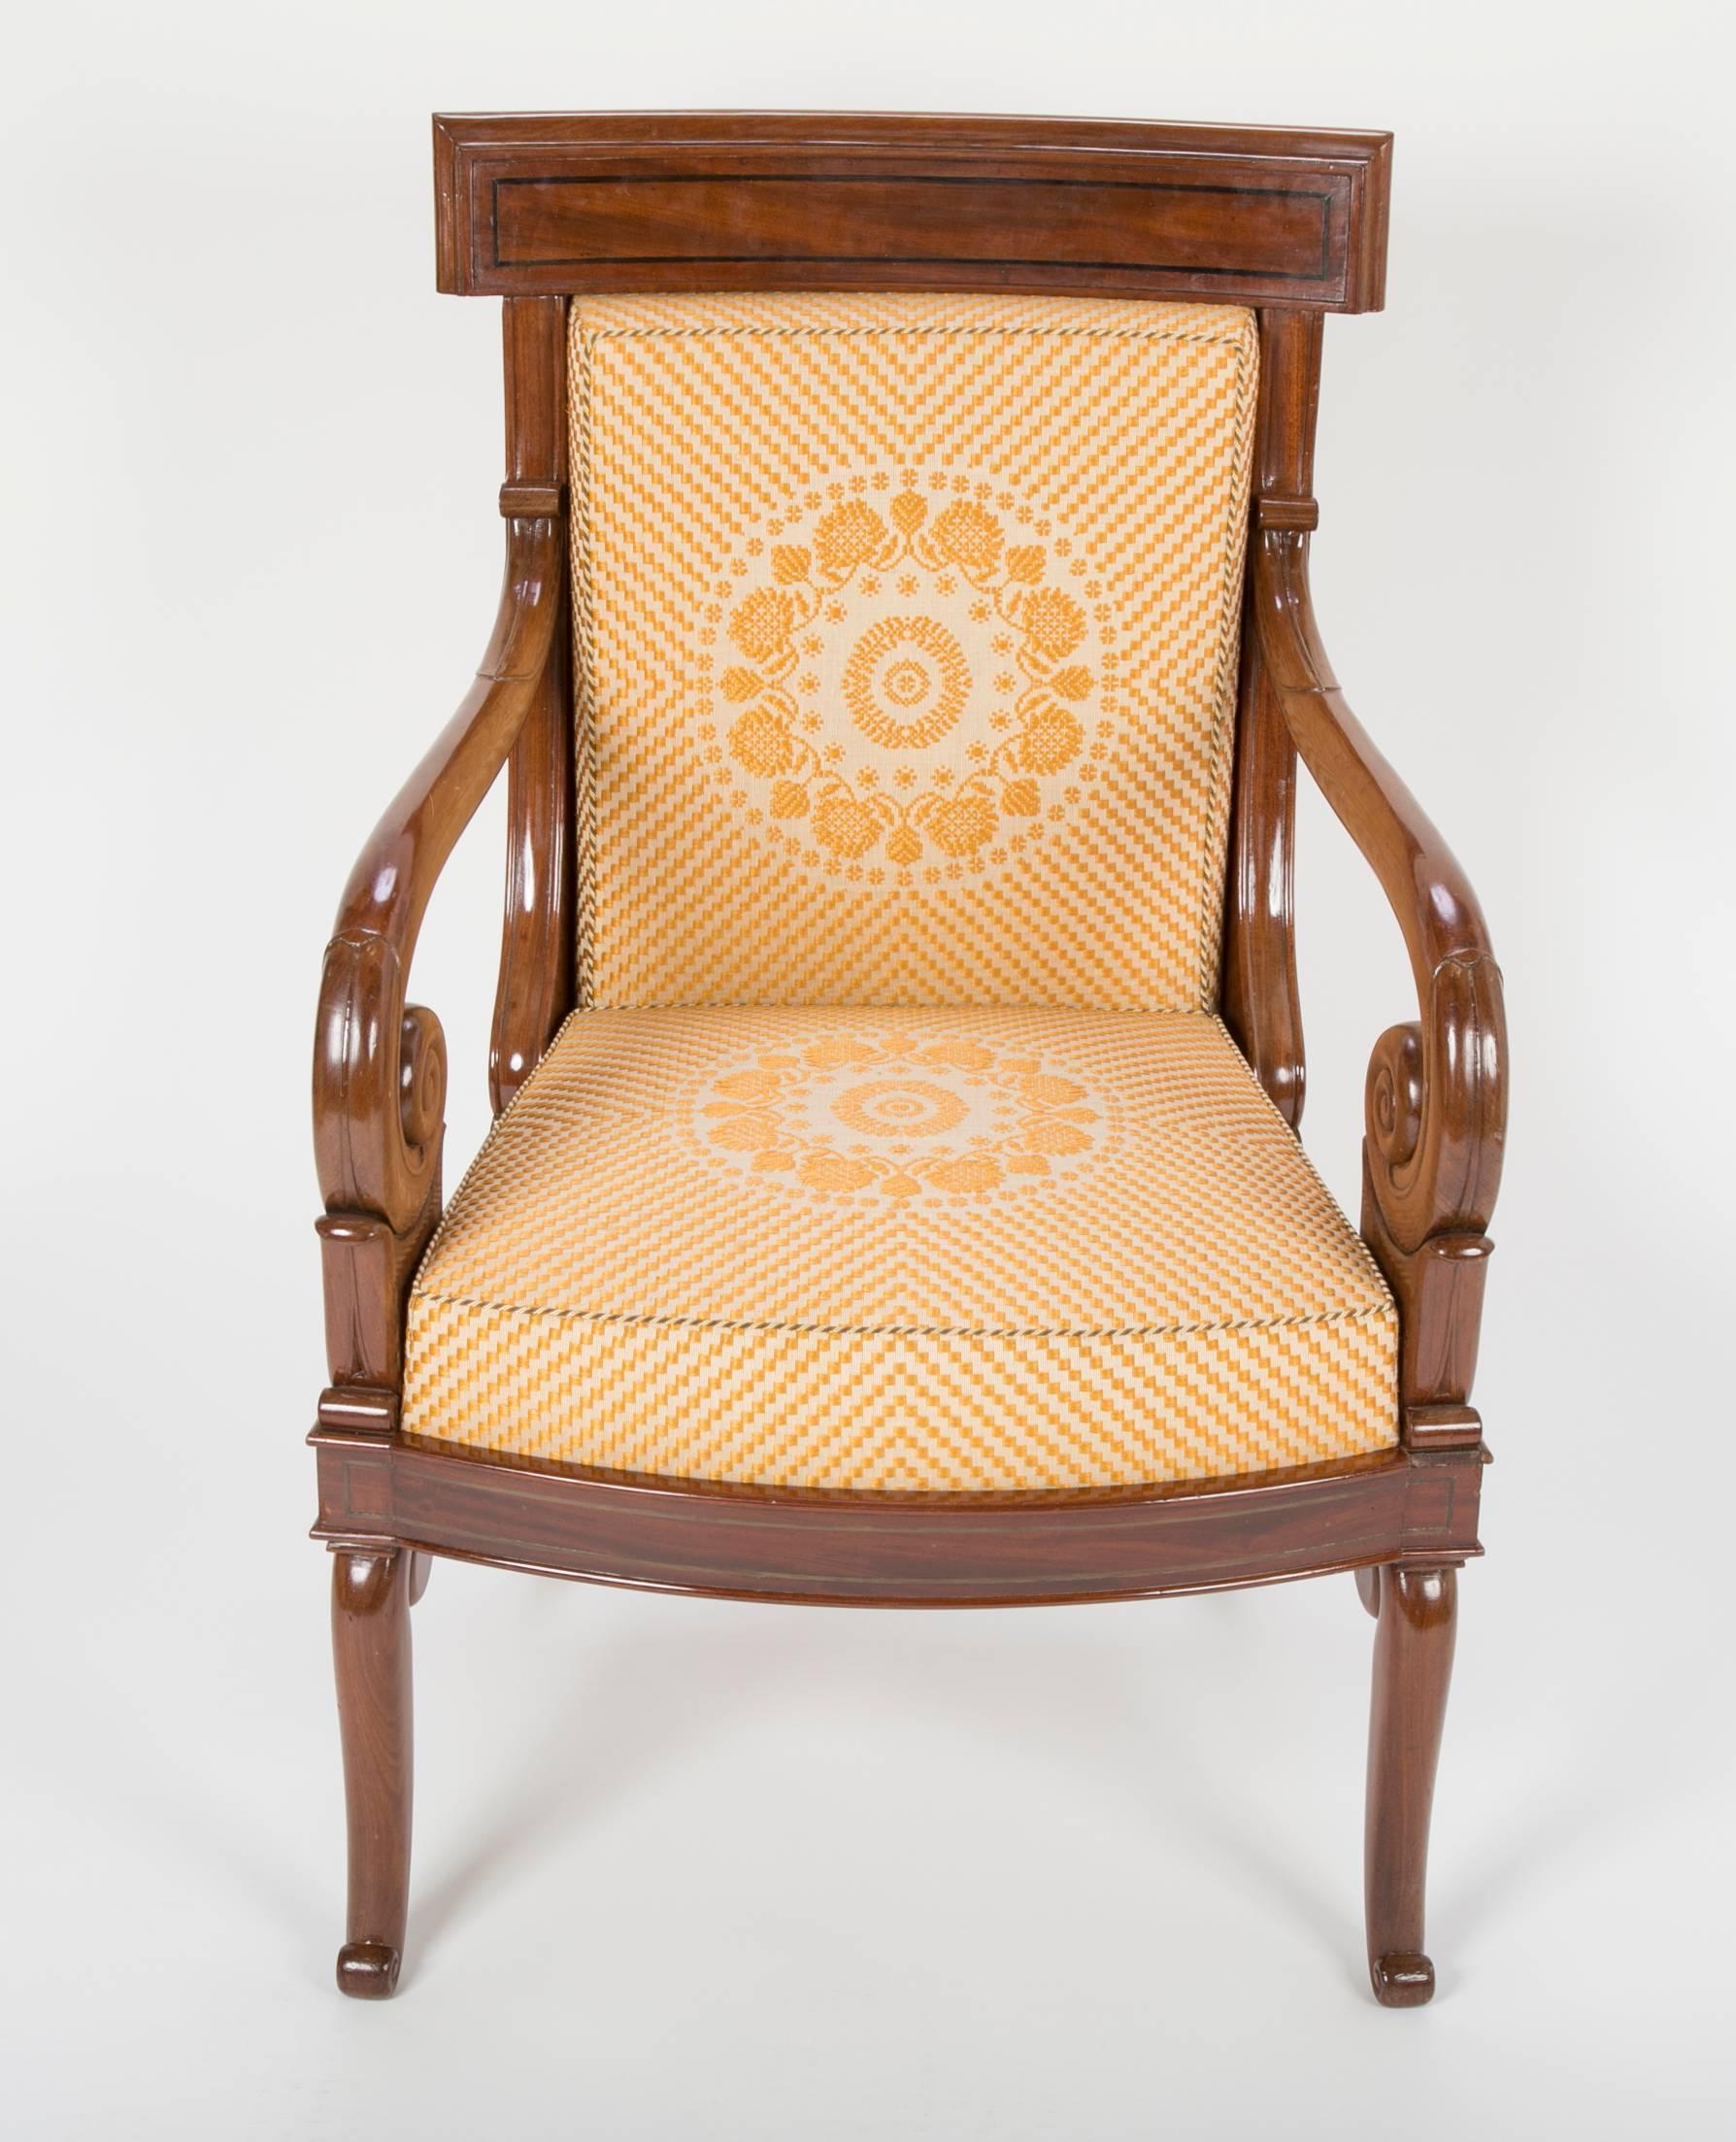 All of the chairs are stamped JJ Werner on the underside of their front rail.  The chairs are carved out of Mahogany.  The stringing details on the back rest and apron are actually brass inlay that has been ebonized.   The chairs are all upholstered